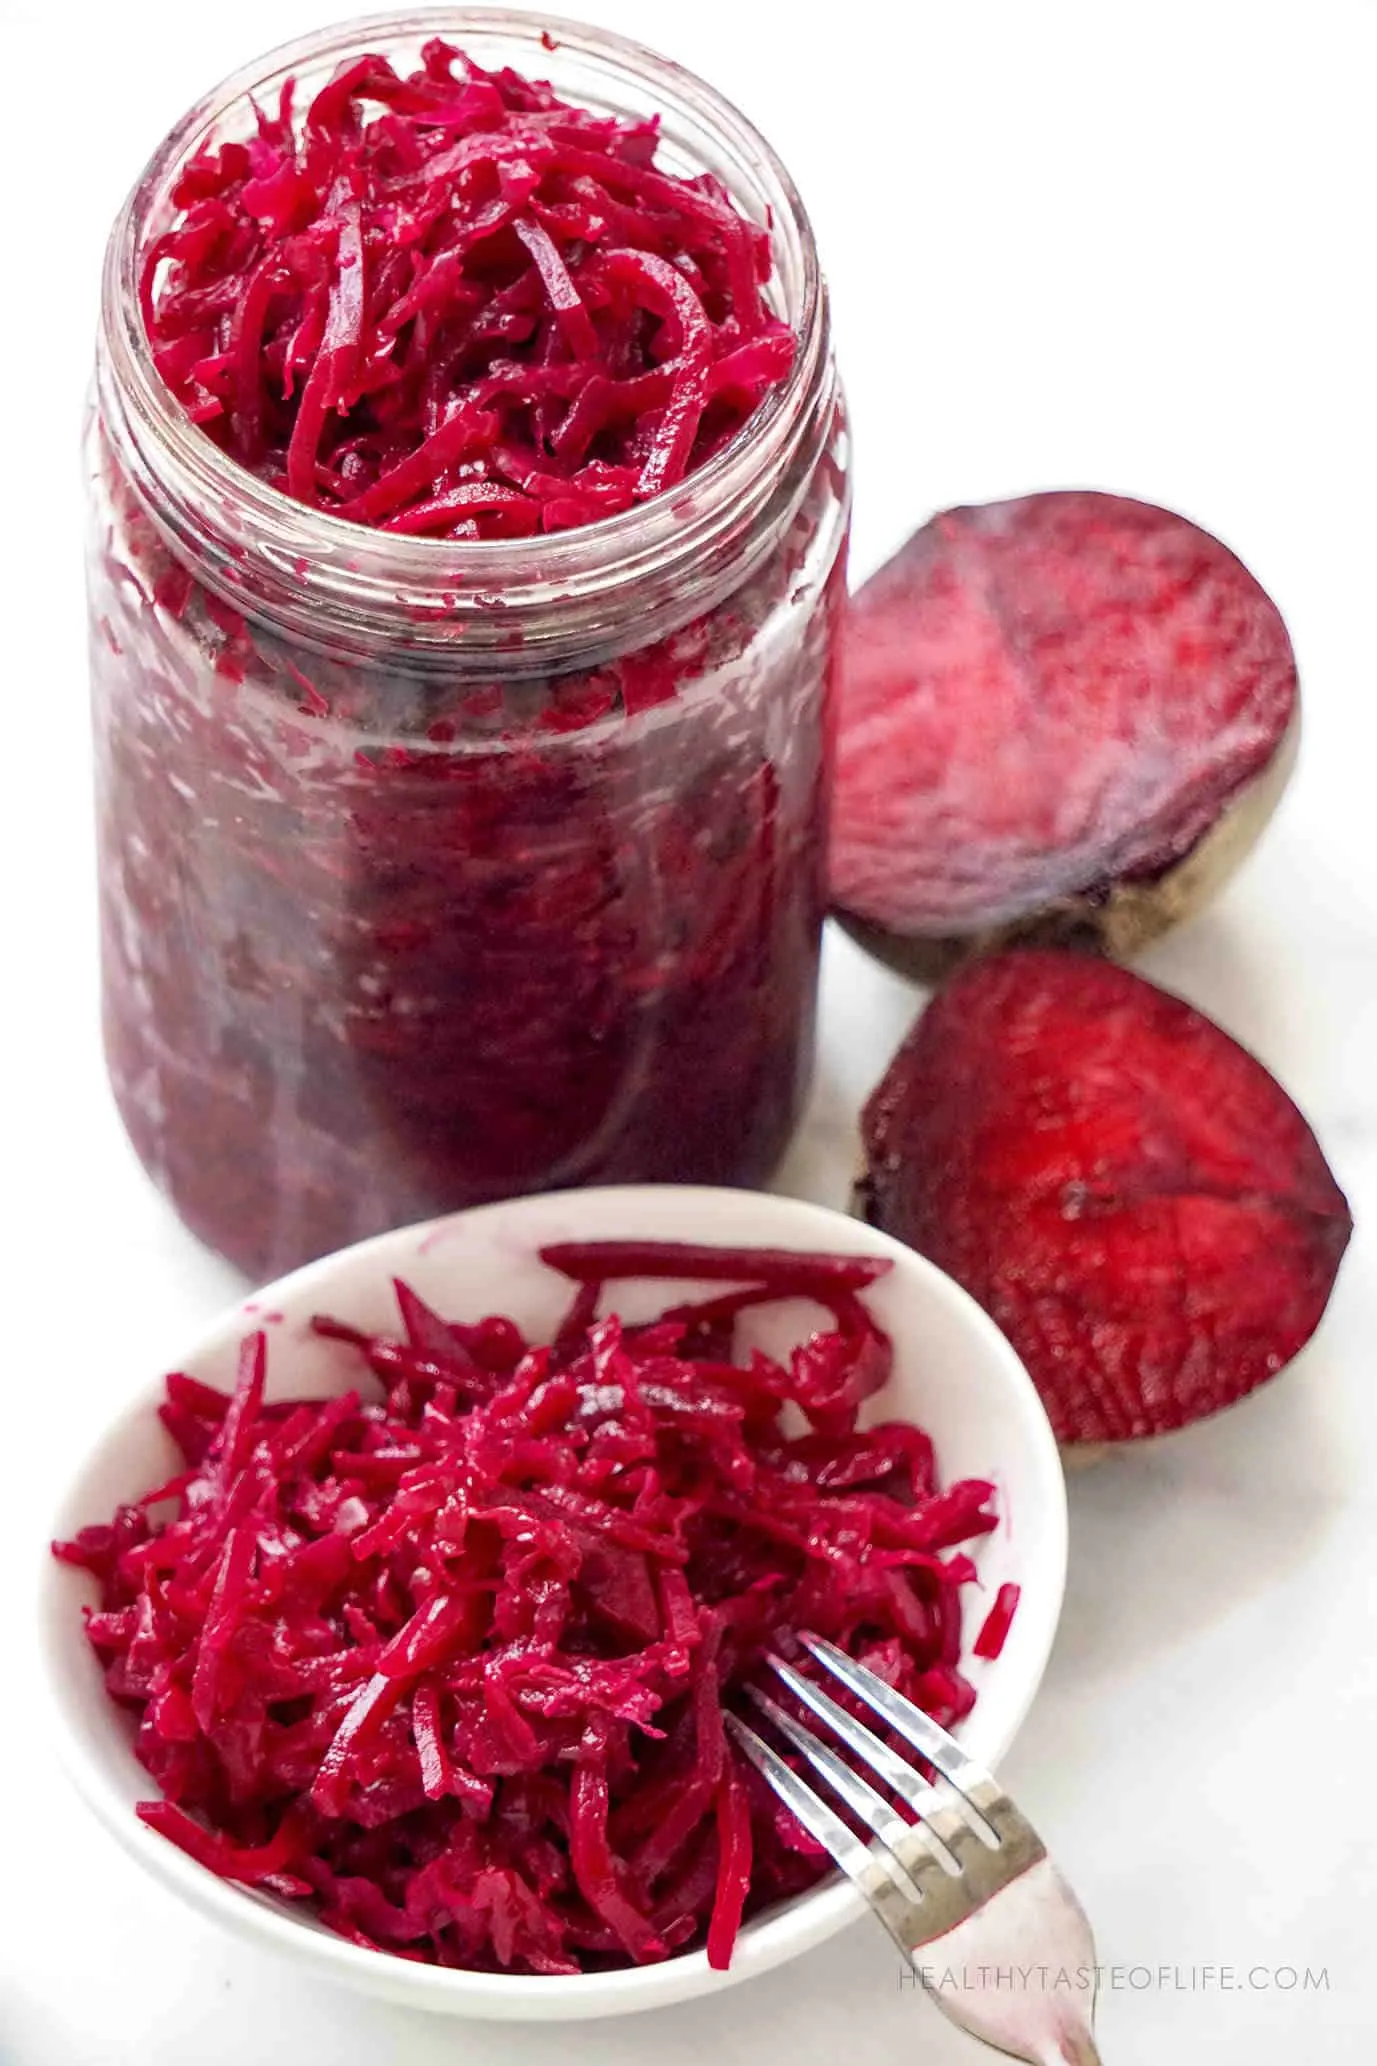 Beet sauerkraut with red cabbage recipe - an easy recipe to lacto ferment beetroot and cabbage - beneficial for the gut health and immune system. 